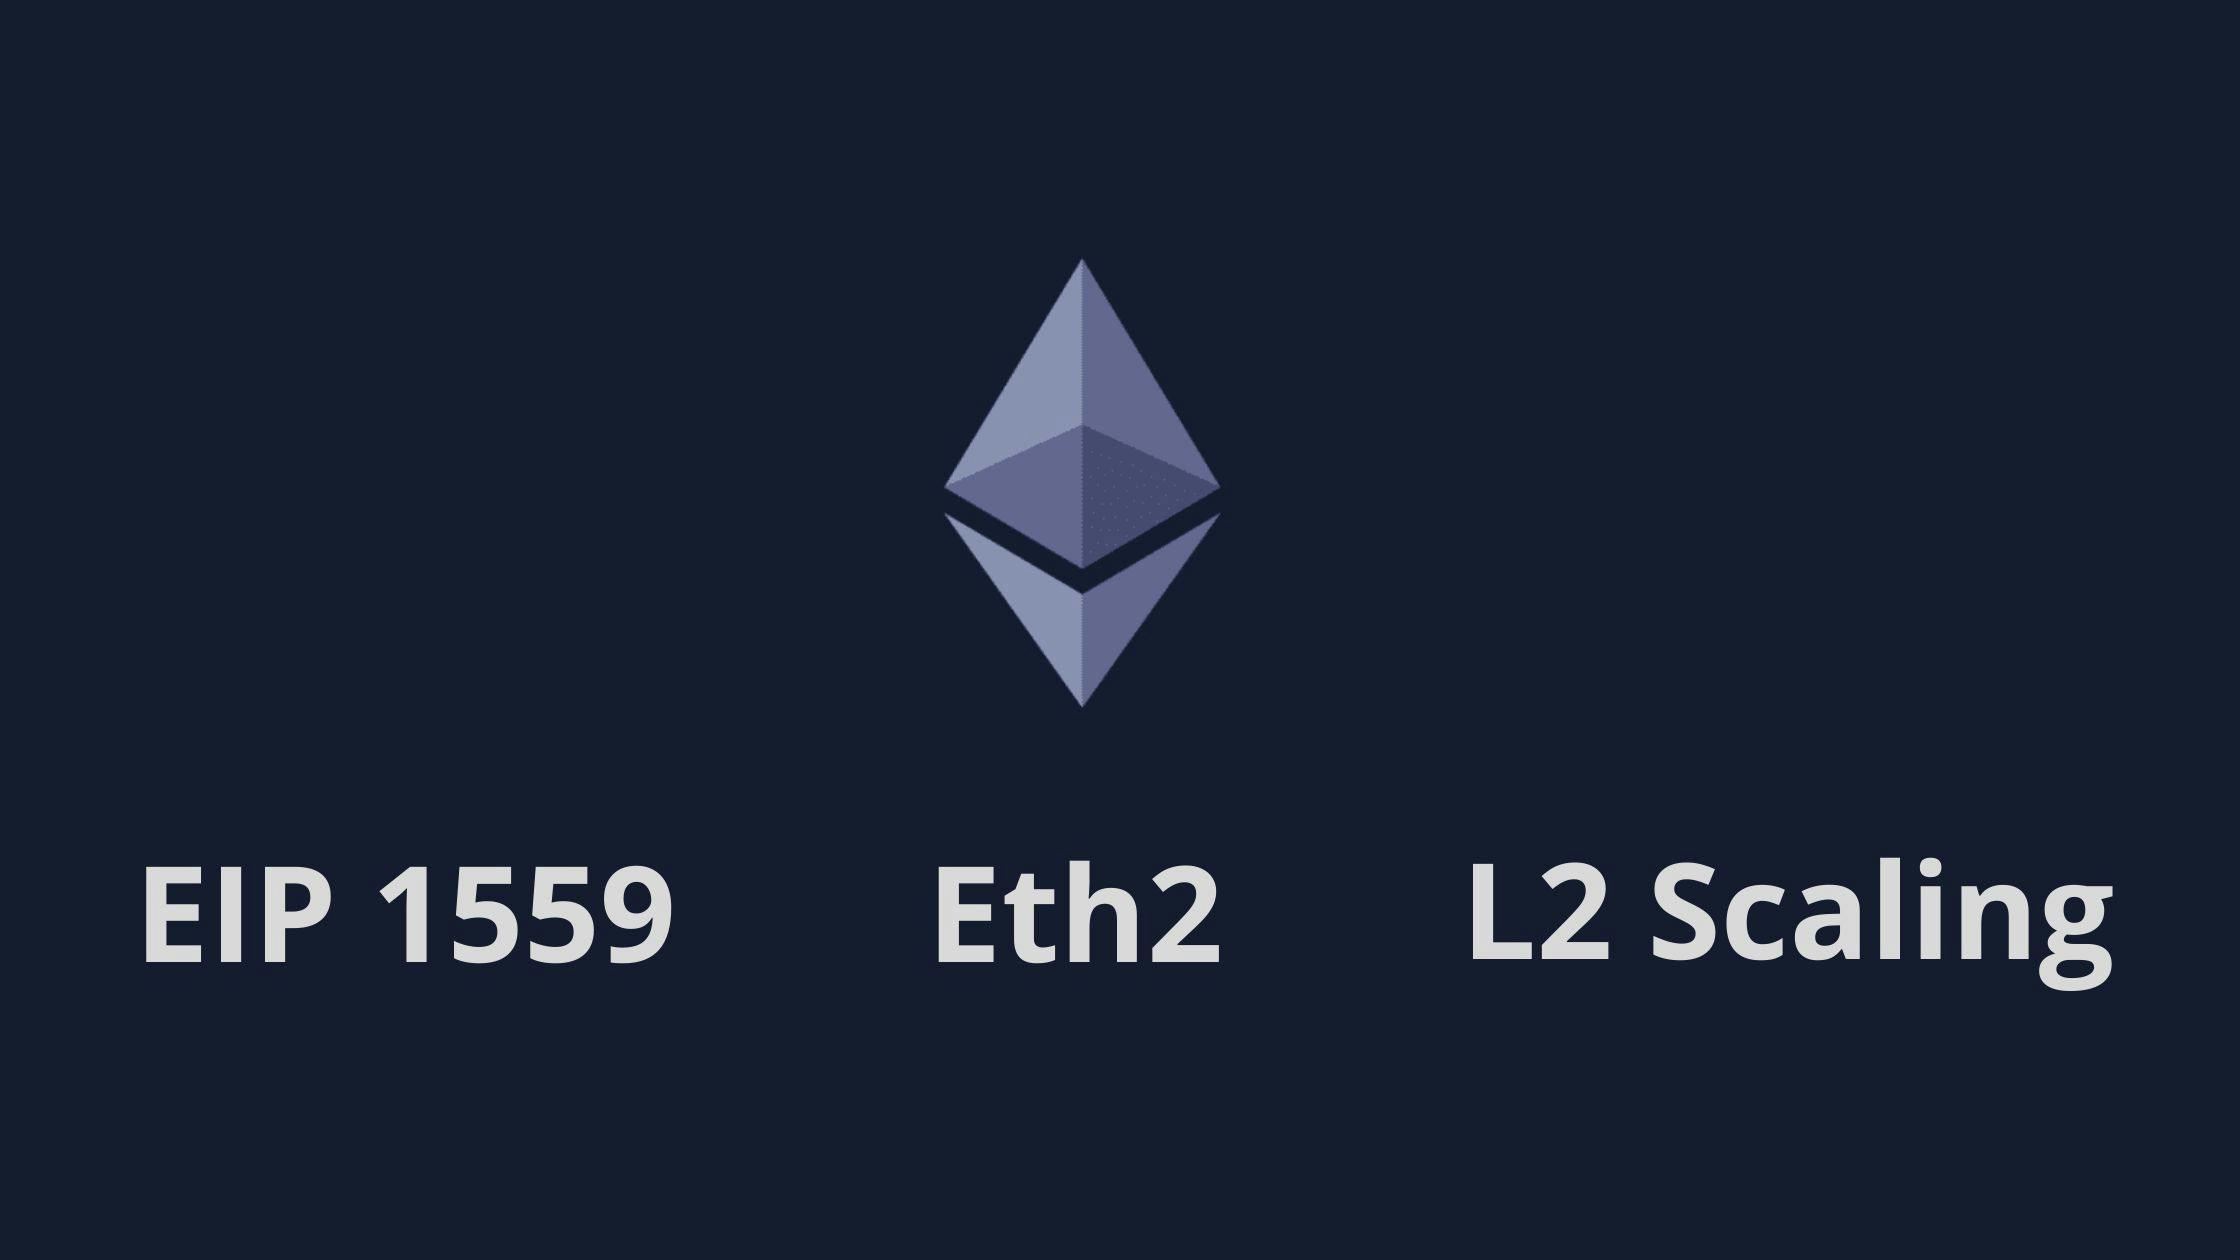 featured image - Ethereum Tokenomics 2021: Impact of Eth2, EIP 1559, and L2 Scaling Solutions on Demand/Supply